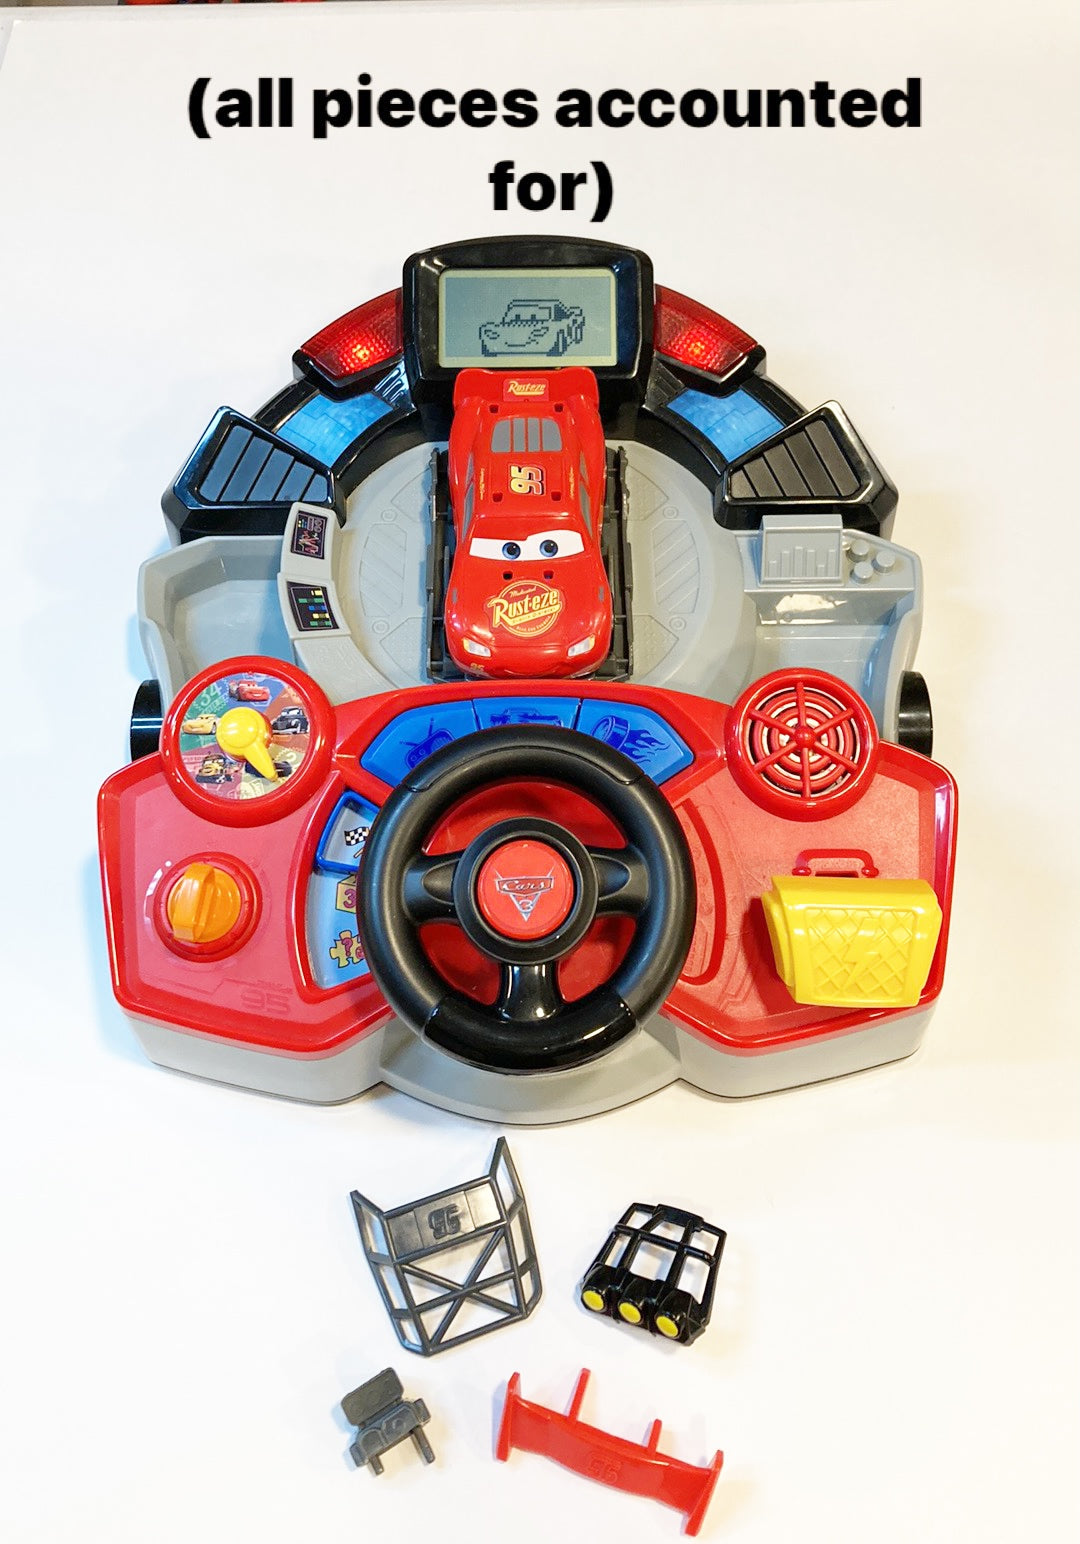 VTECH Lightning McQueen Race Station Game-Pickup possible in West Chester, Norwood, Blue Ash, or Reading outside of bi-annual sales event pickup.